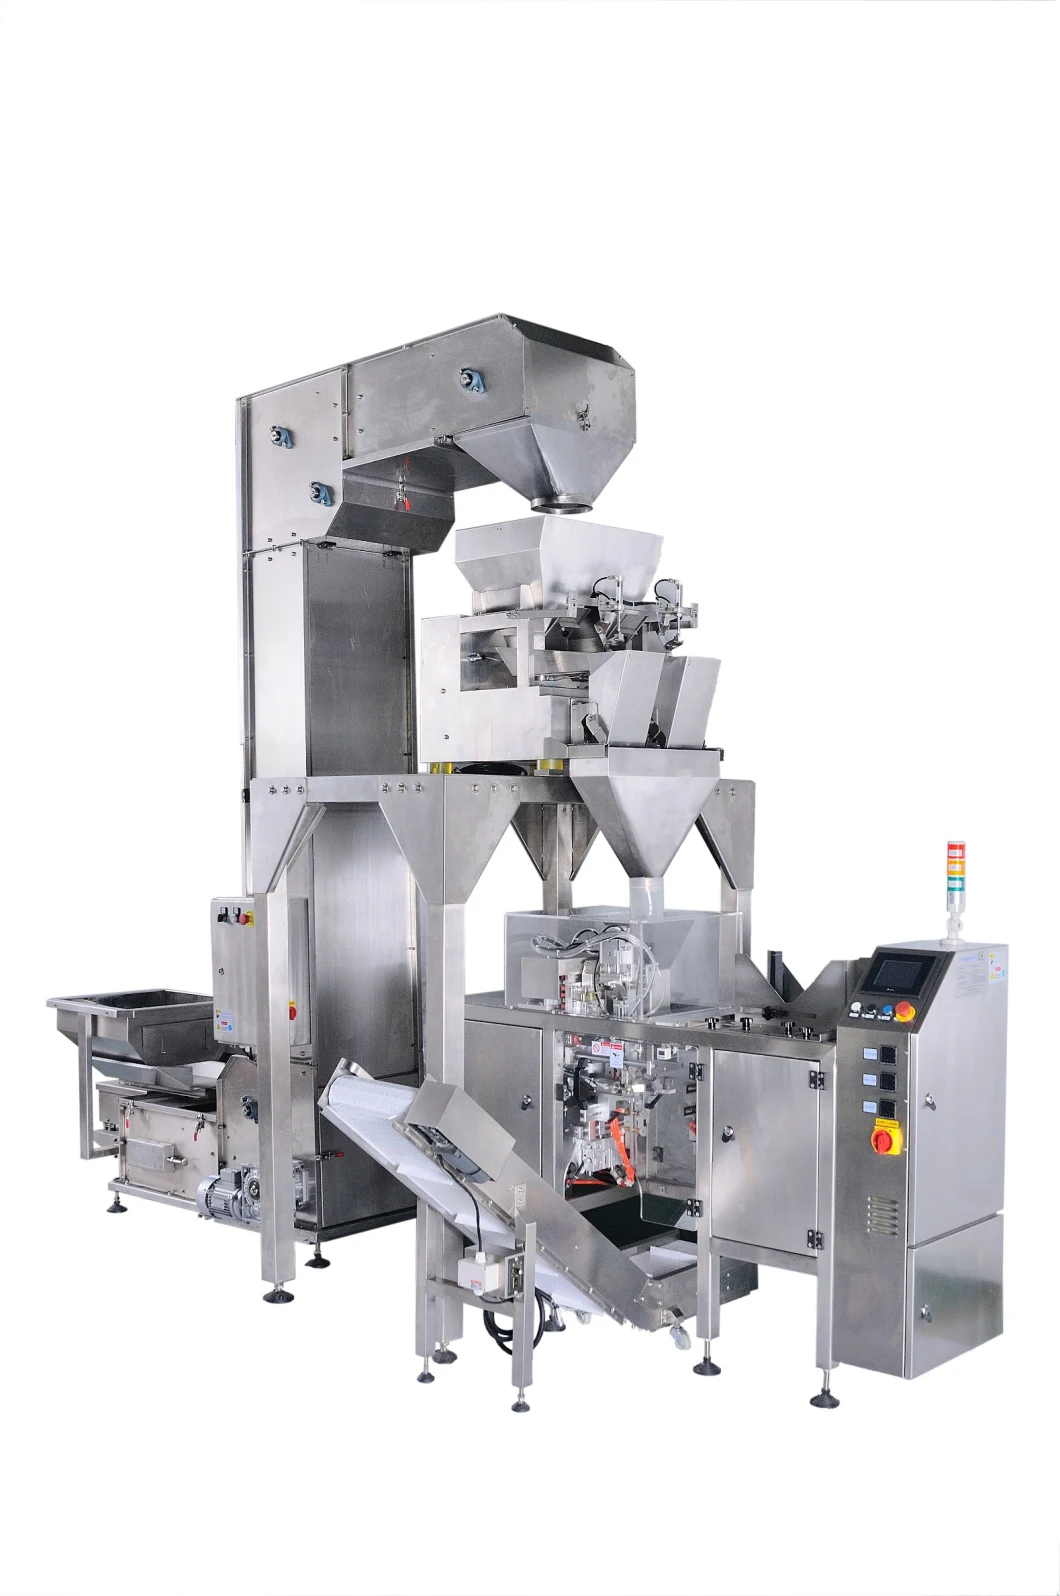 Automatic Lentils / Chickpeas / Coffee Bean Packaging Machine